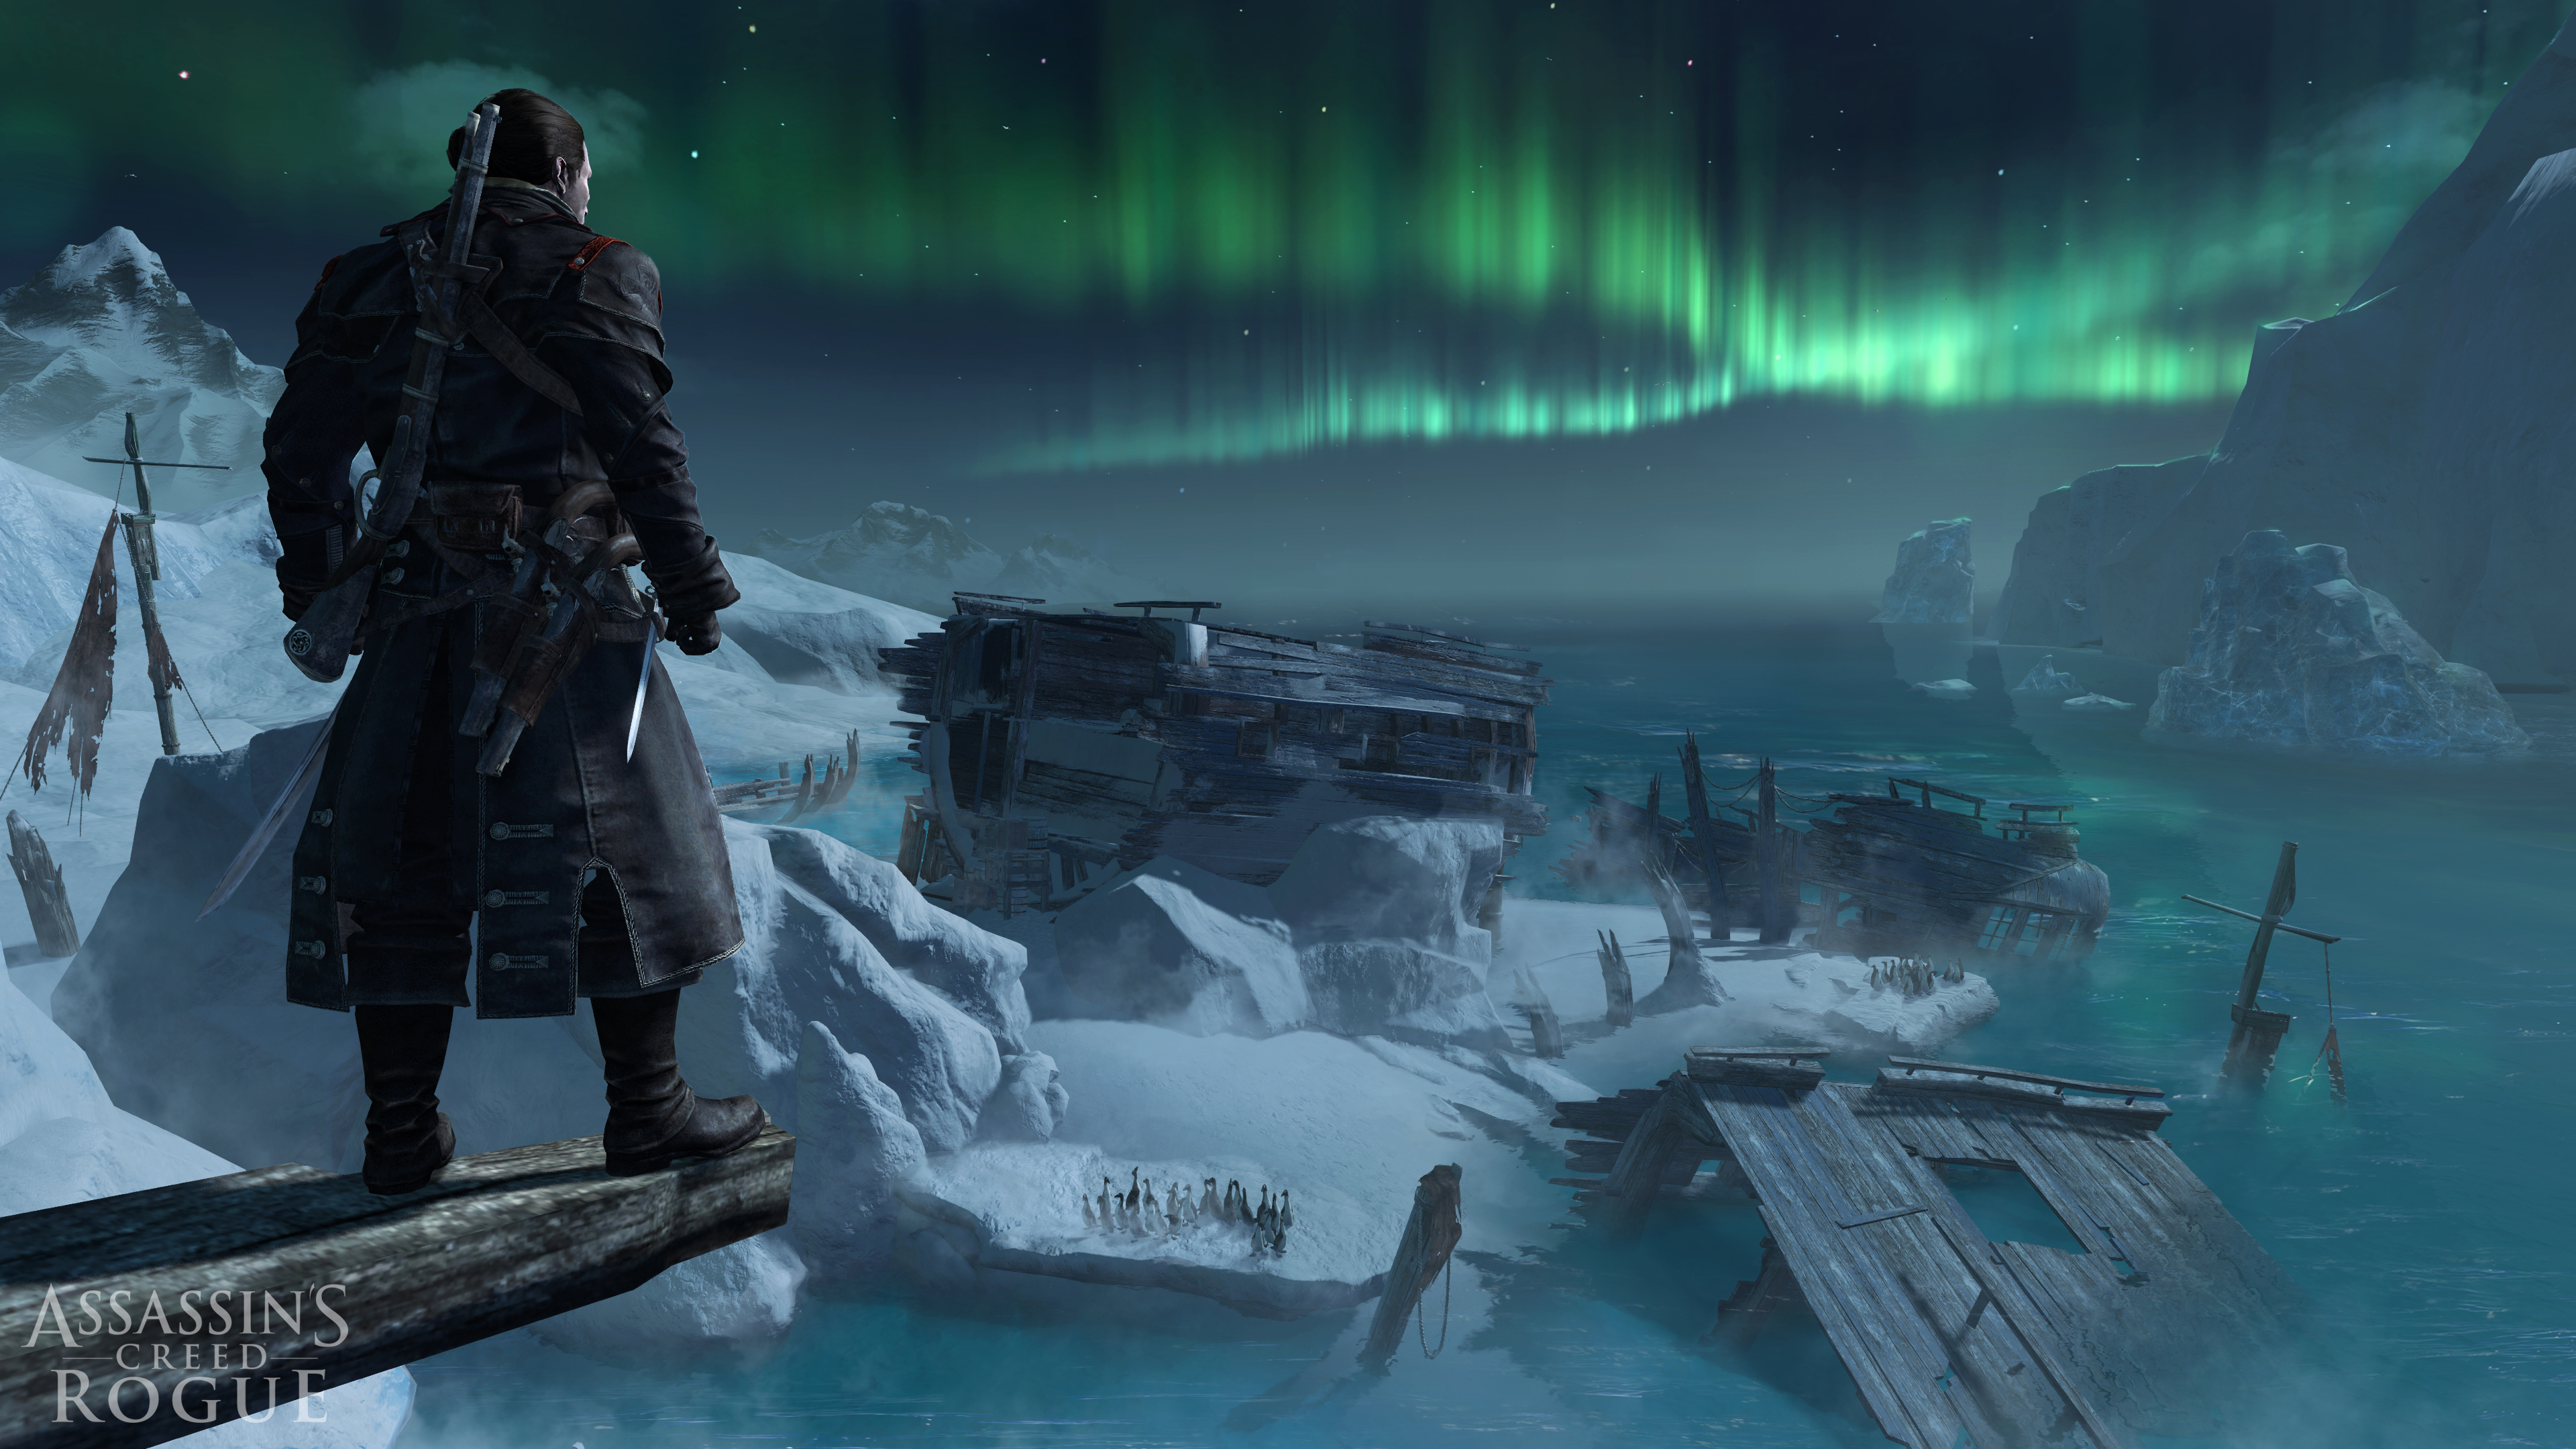 Assassin's Creed: Rogue Wallpapers, Pictures, Images